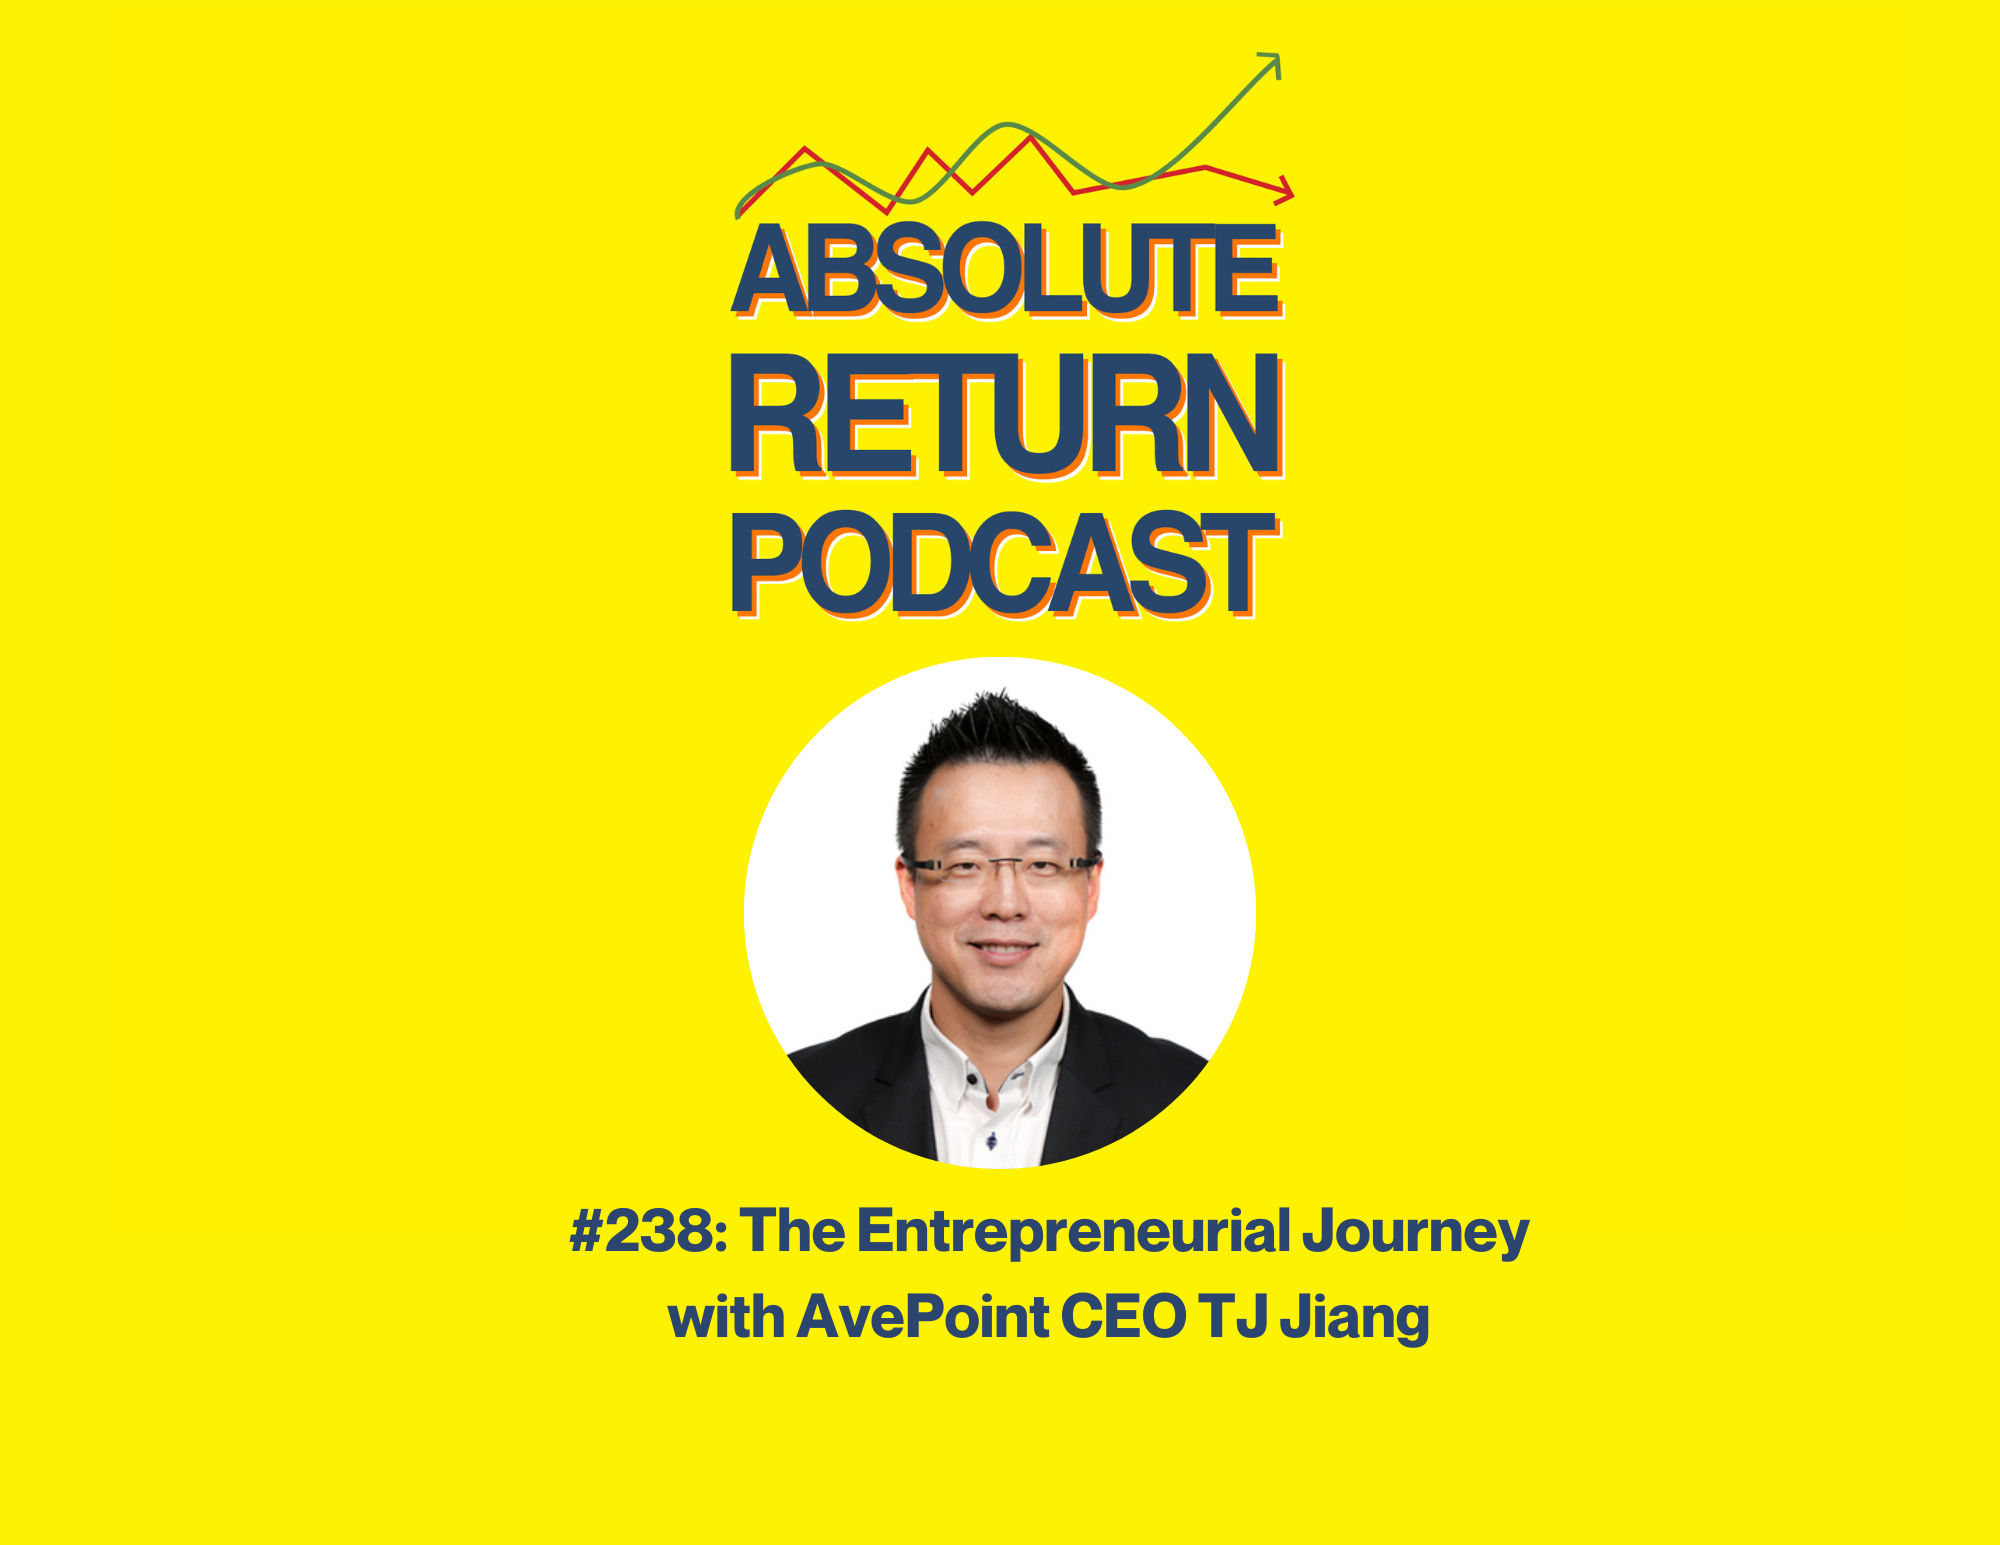 Absolute Return Podcast #238: The Entrepreneurial Journey with AvePoint CEO TJ Jiang